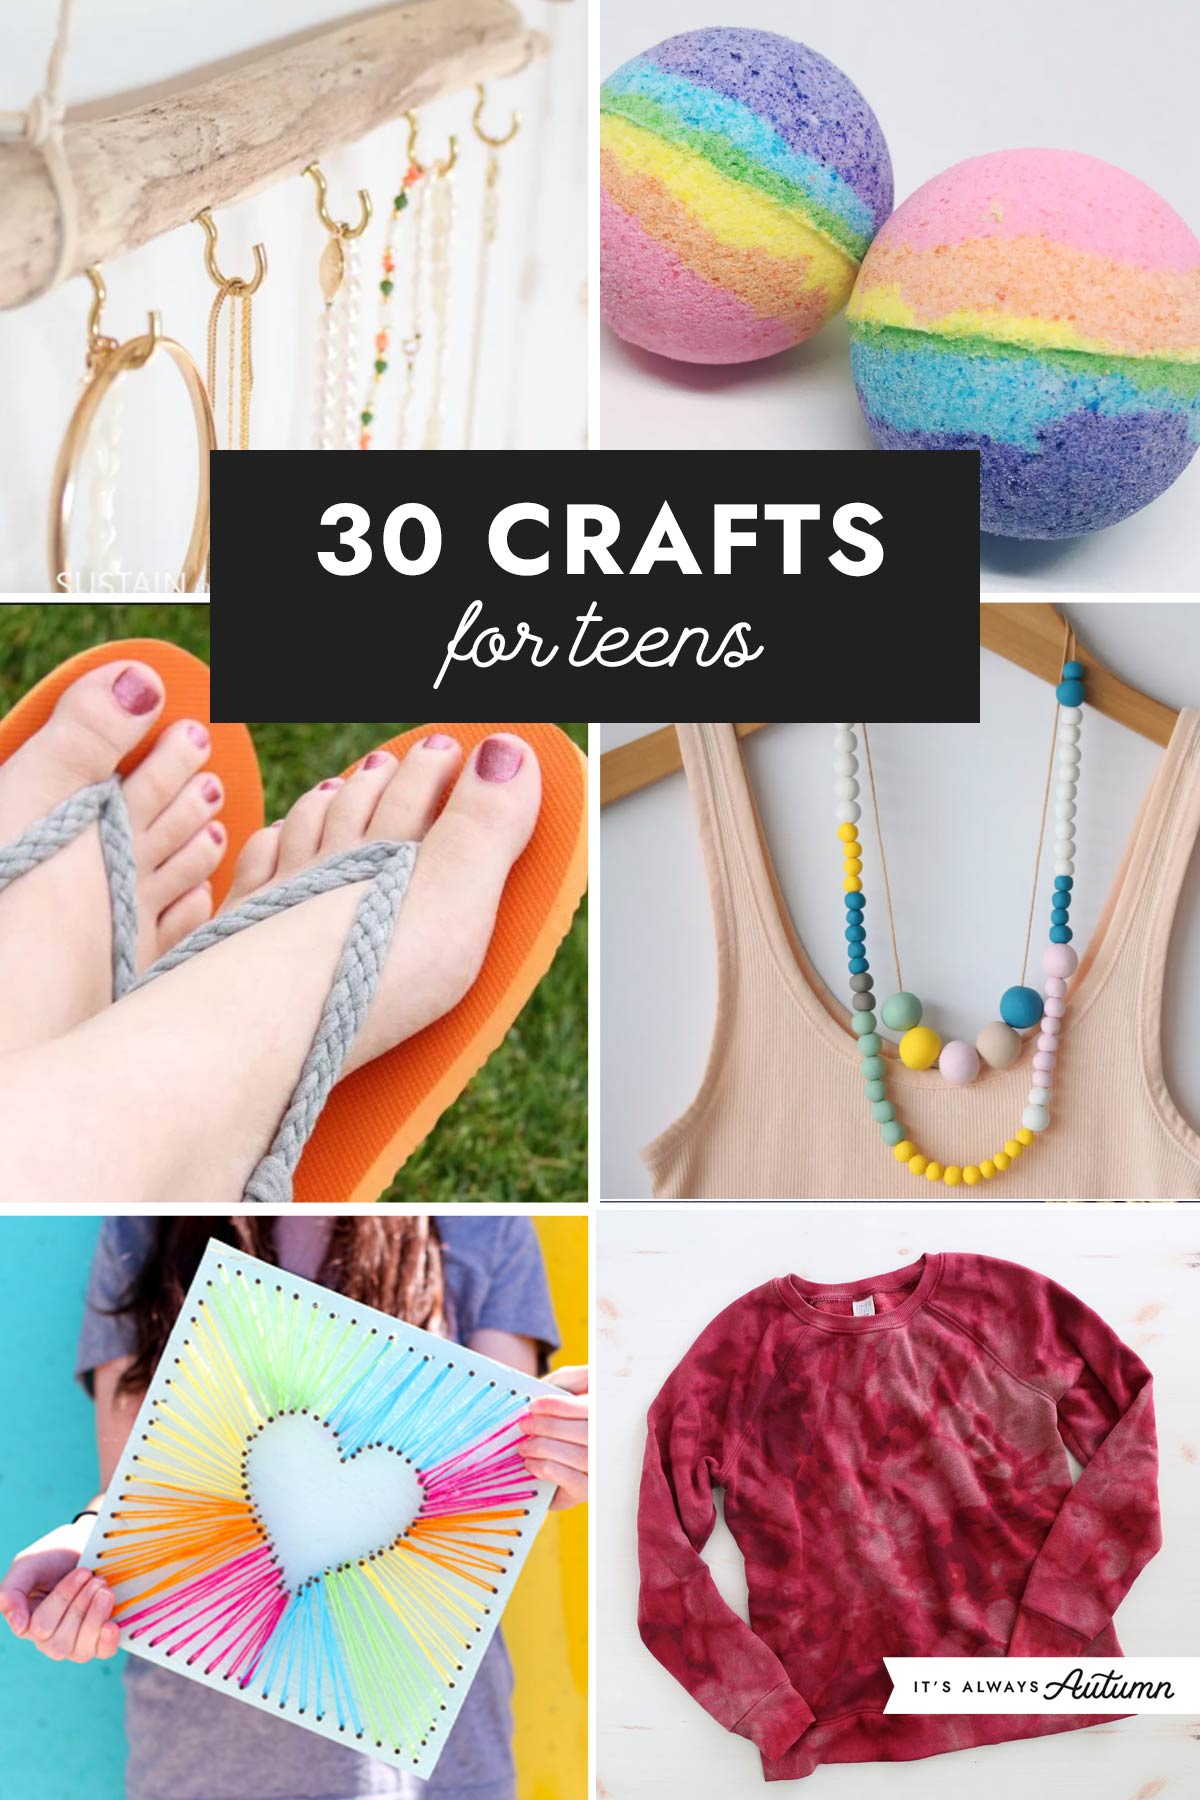 4 Simple Crafts for Teens - Craftbusters